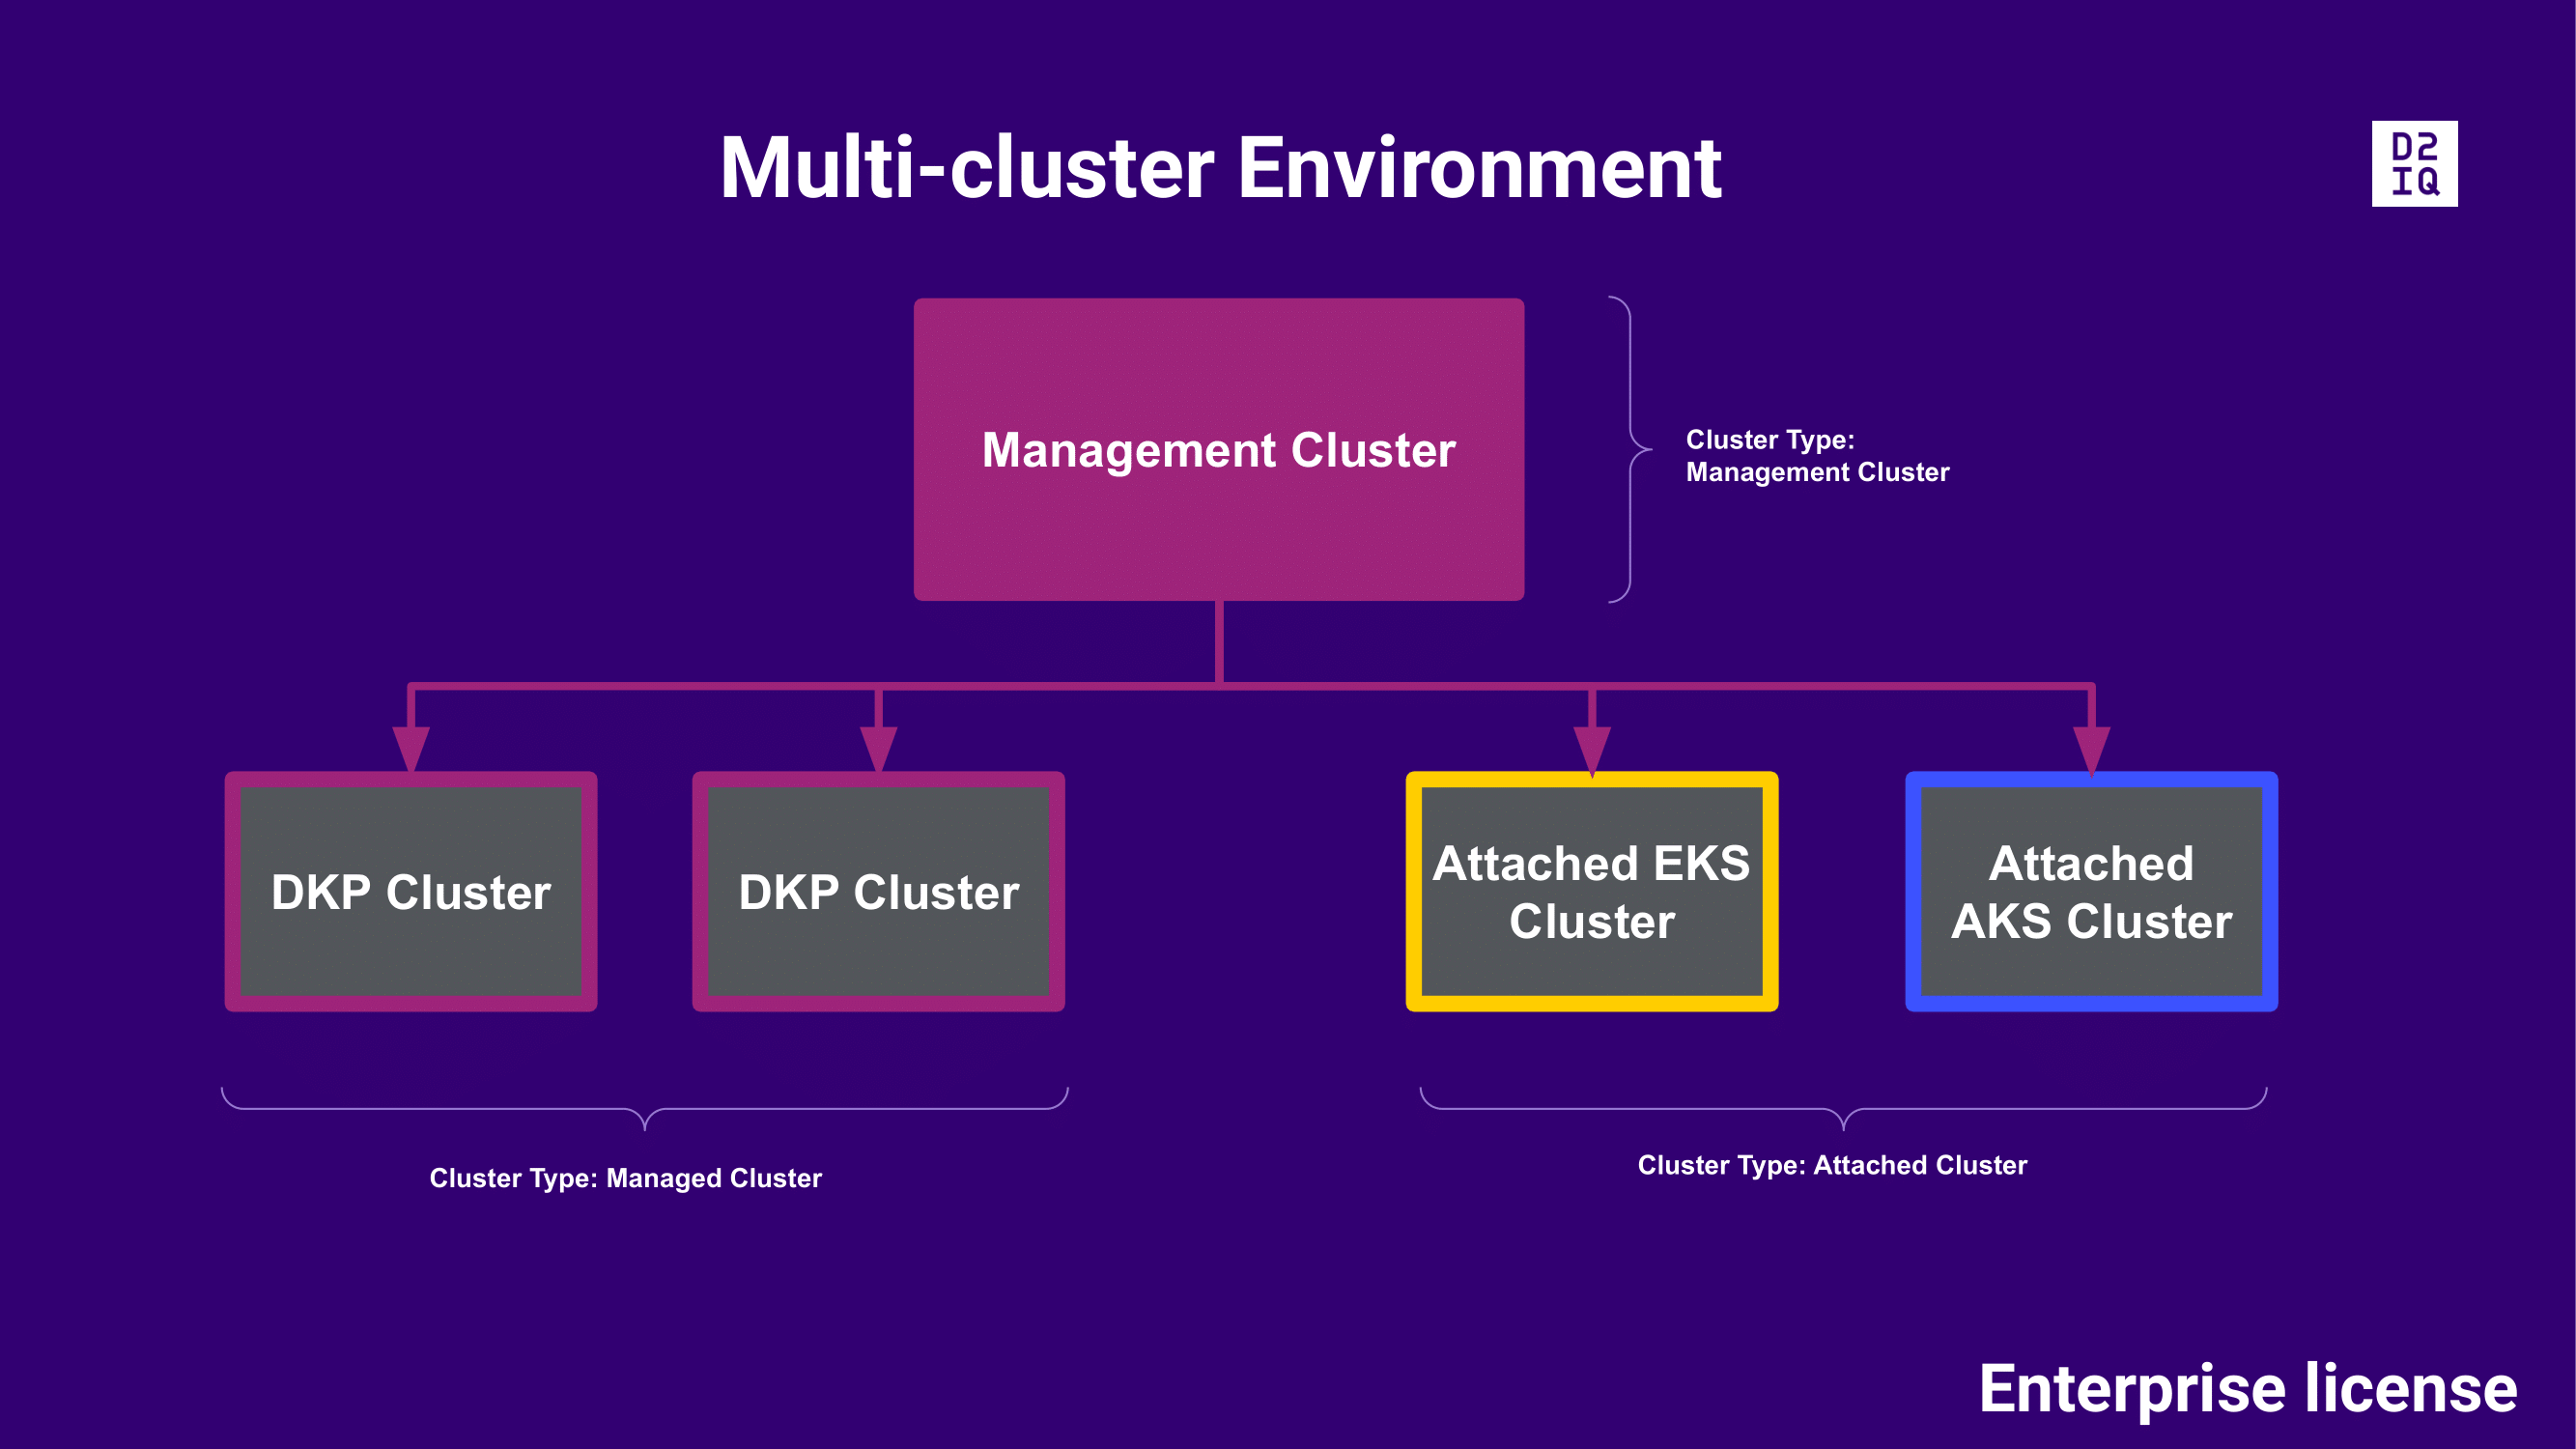 The Management Cluster is the main cluster. There are several clusters connected to this Management clusters. On the left side we have DKP clusters, which are of the type Managed. On the right we have Attached EKS and AKS clusters, which are of the type Attached.